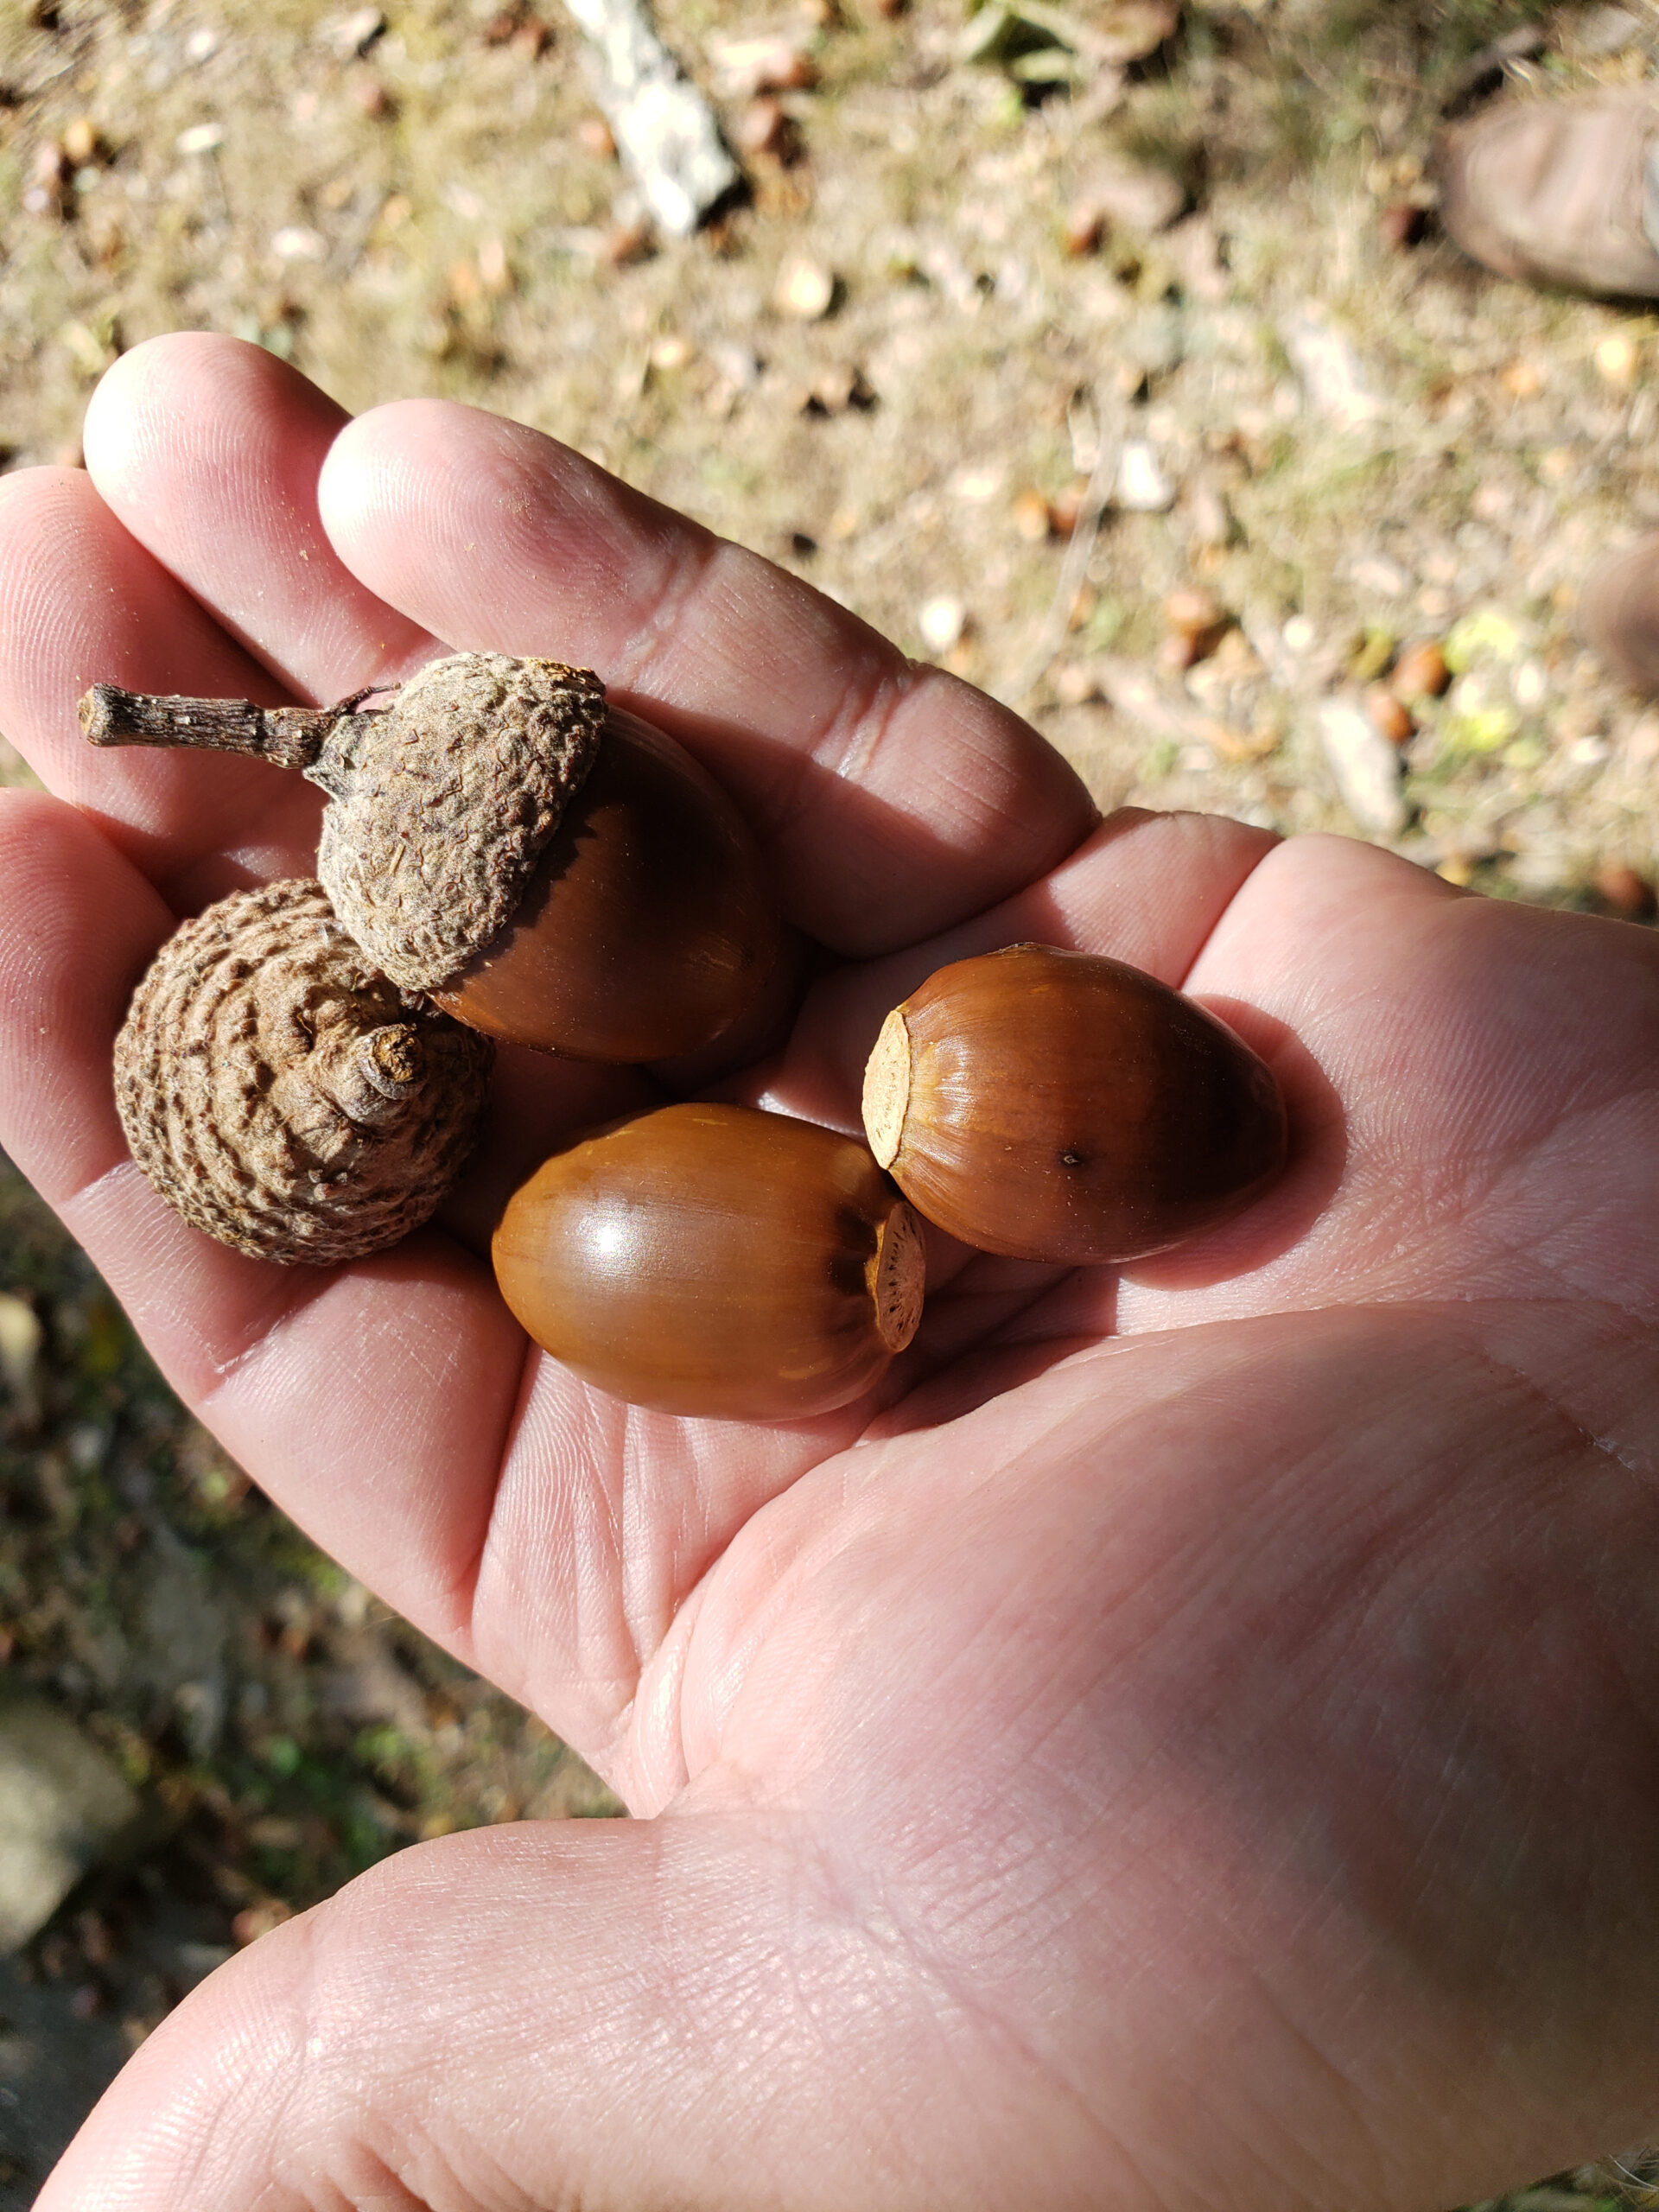 When and why oak trees overproduce acorns